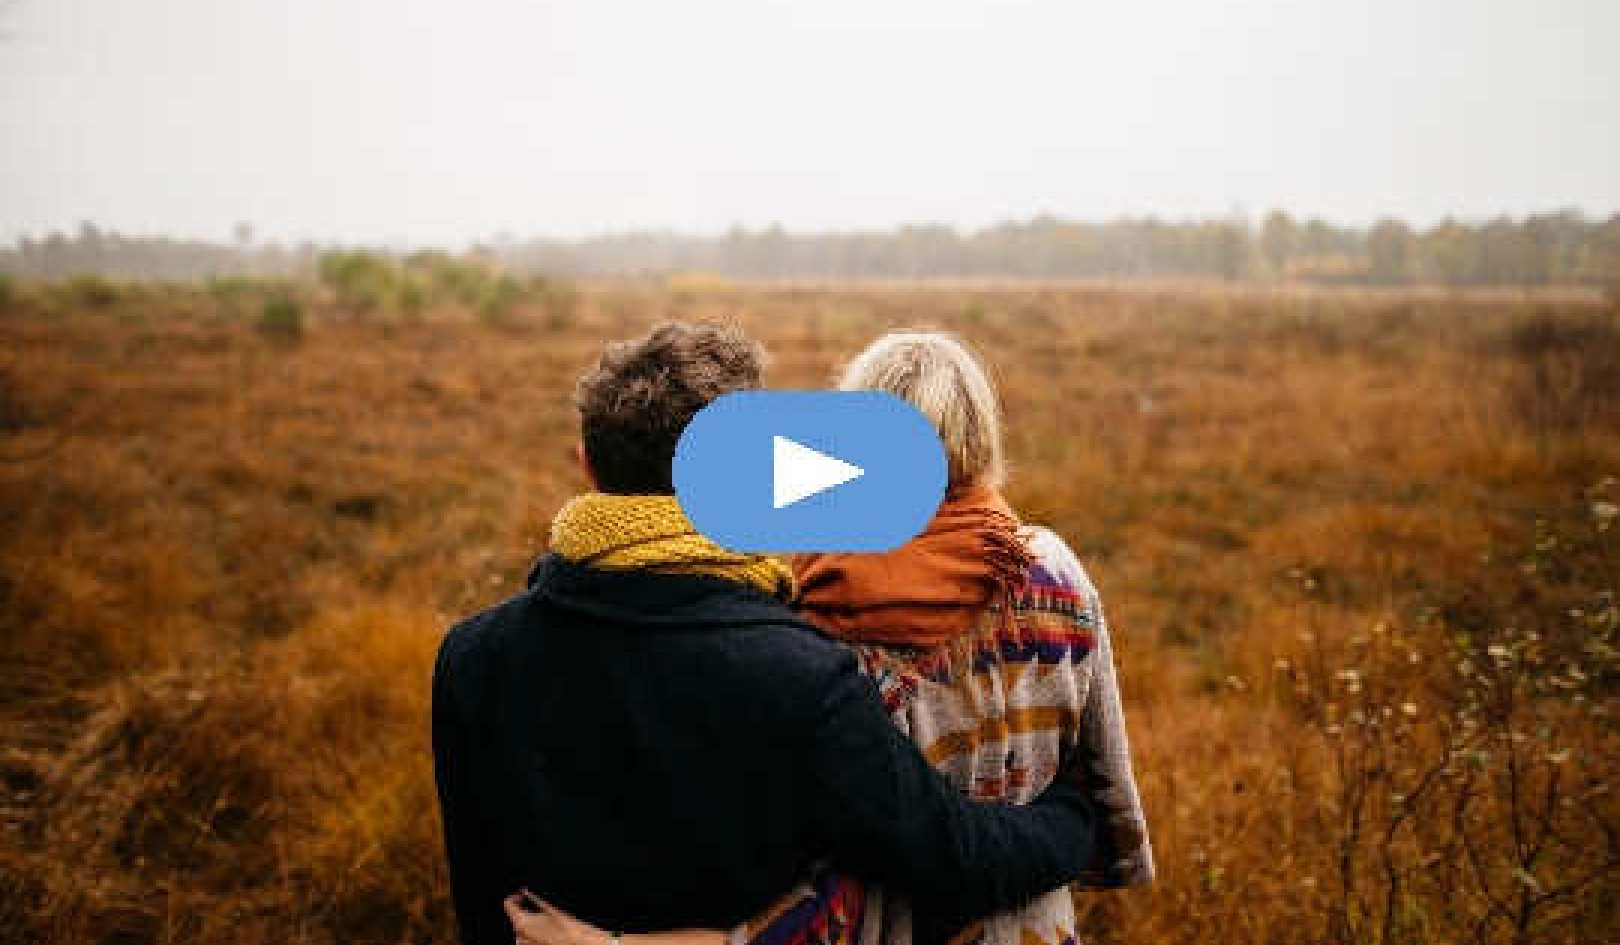 Do You Wish To Keep Love Alive? Here's How (Video)